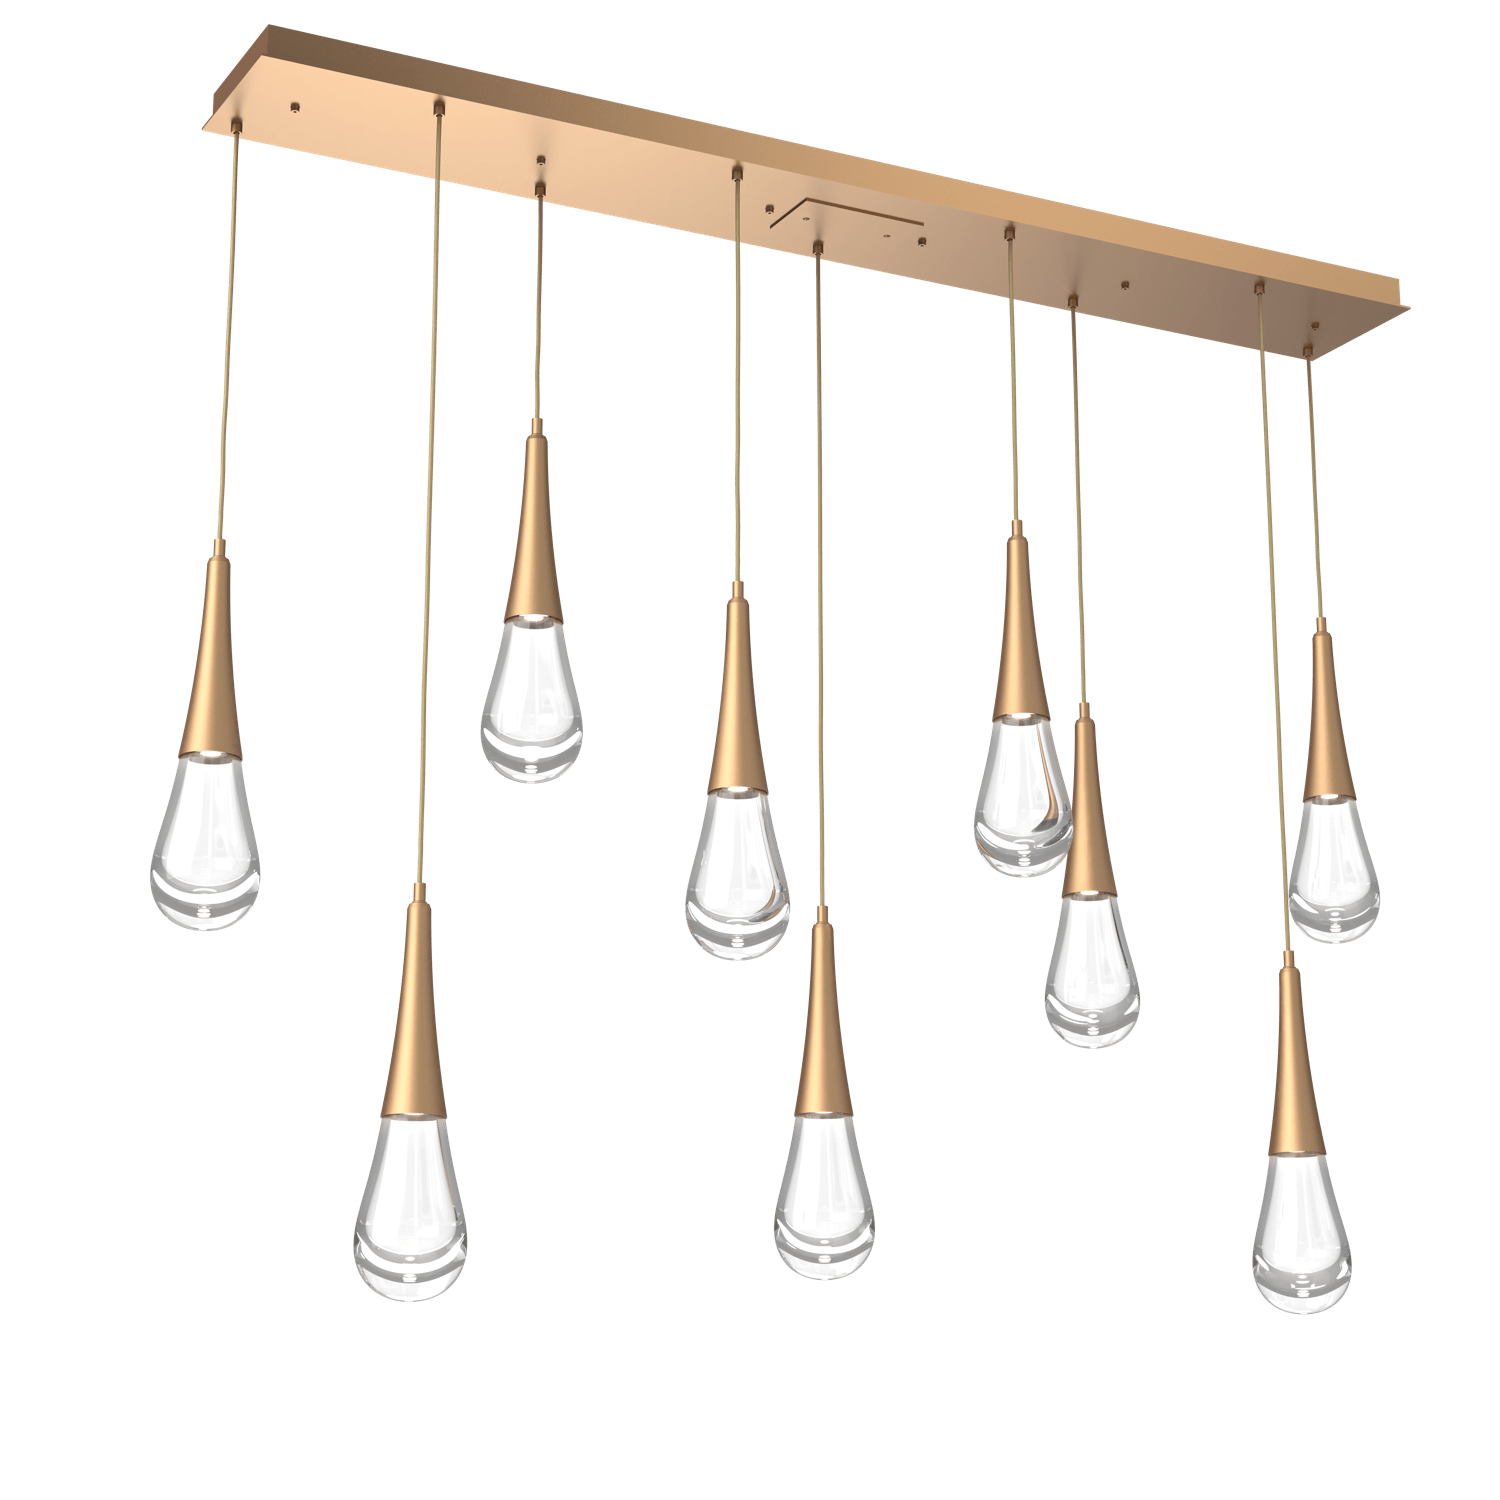 PLB0078-09-NB-Hammerton-Studio-Raindrop-9-light-linear-pendant-chandelier-with-novel-brass-finish-and-clear-blown-glass-shades-and-LED-lamping